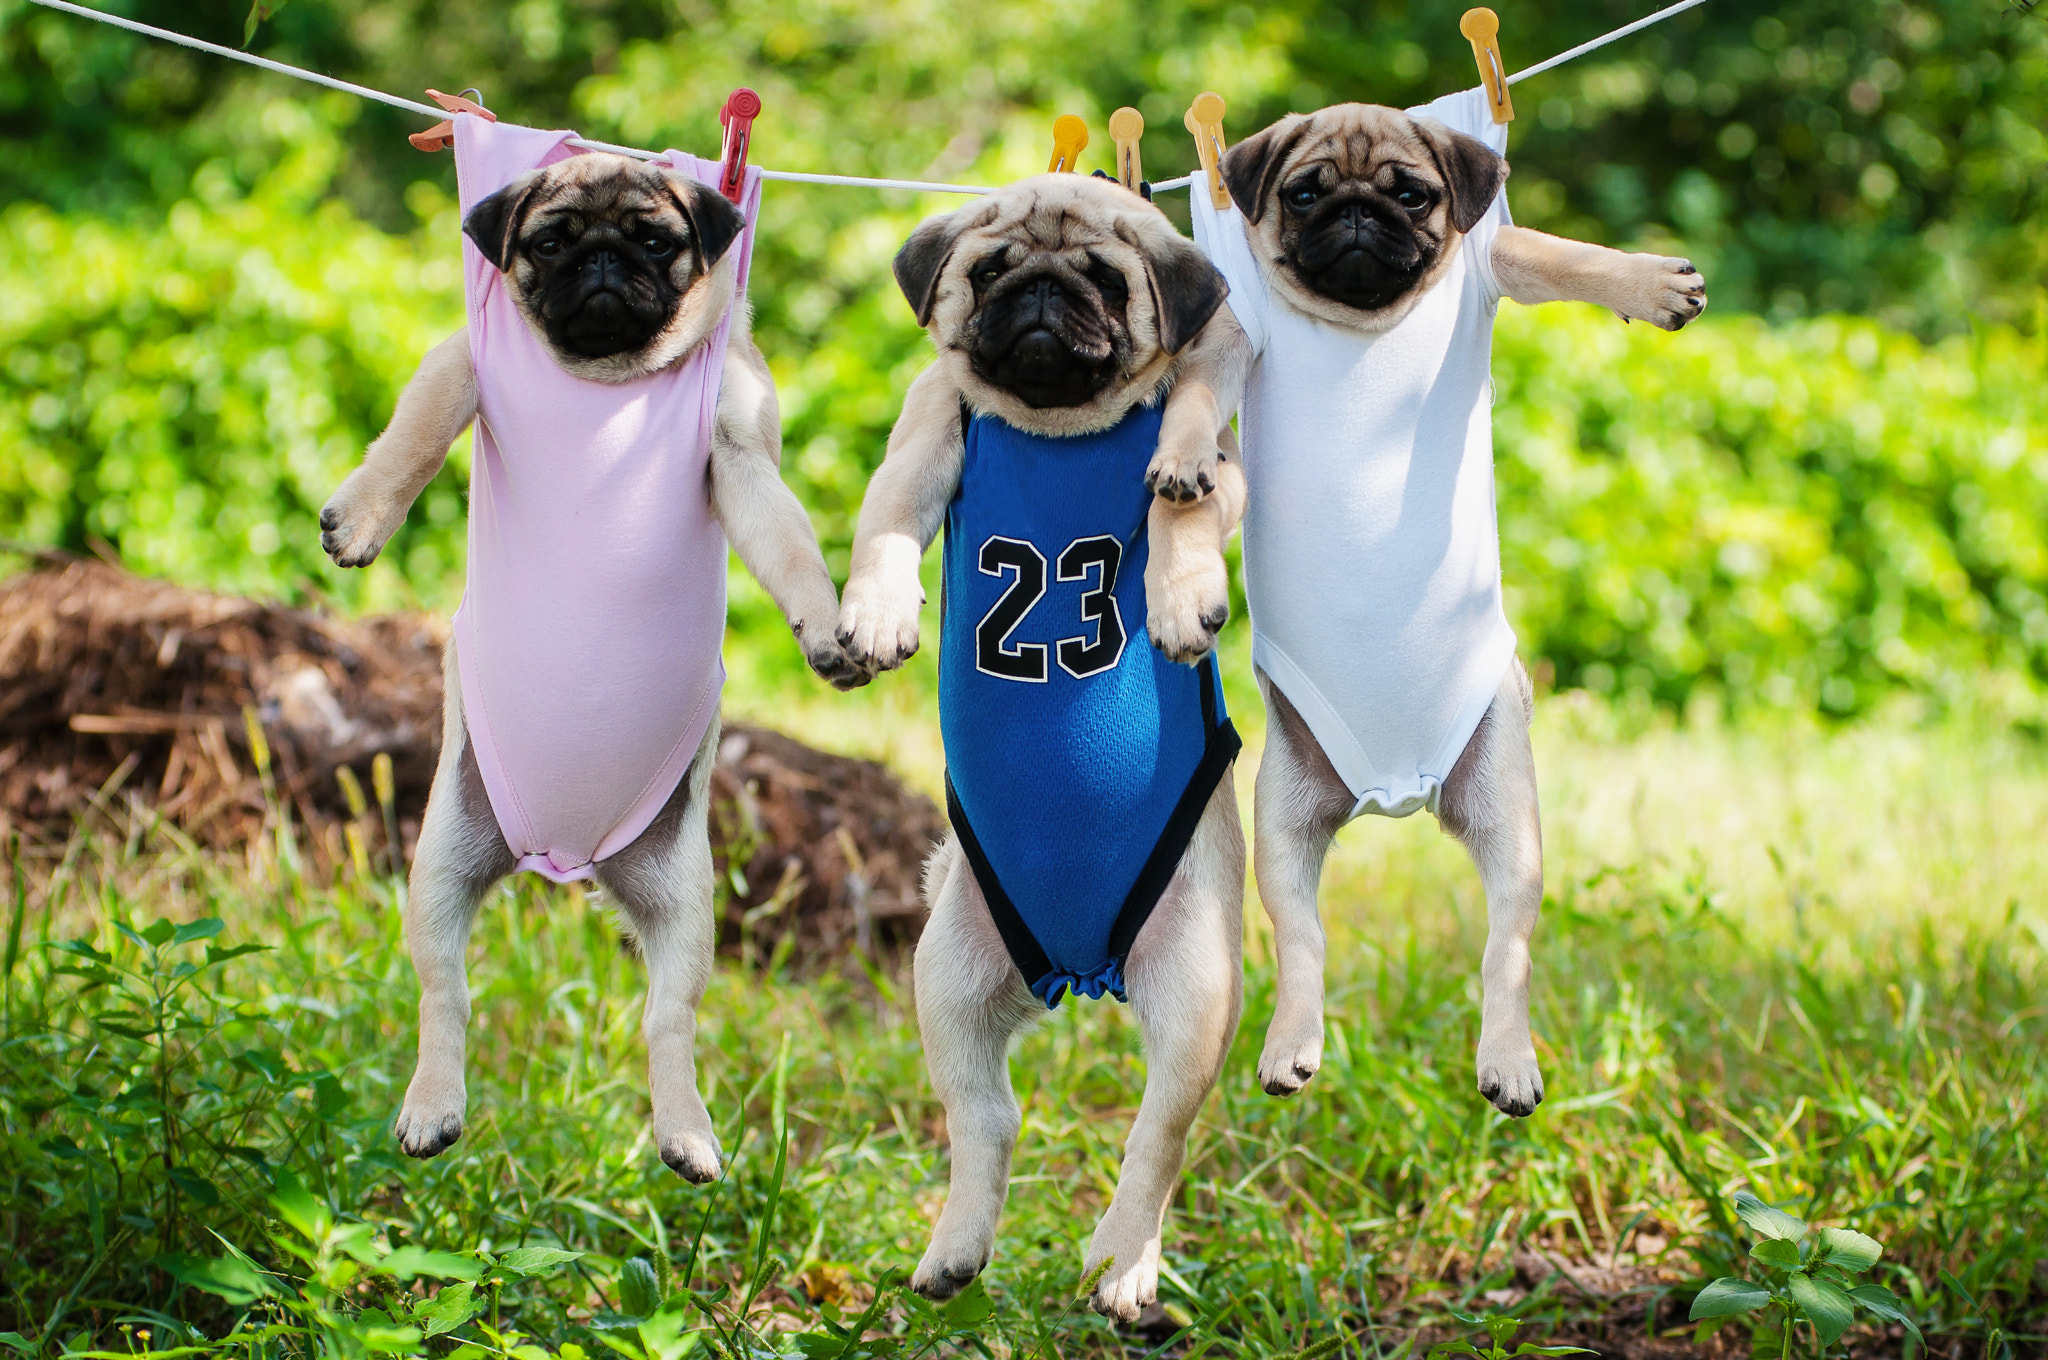 Nikon D90 sample photo. Funny pug puppies weigh in a clothesline photography